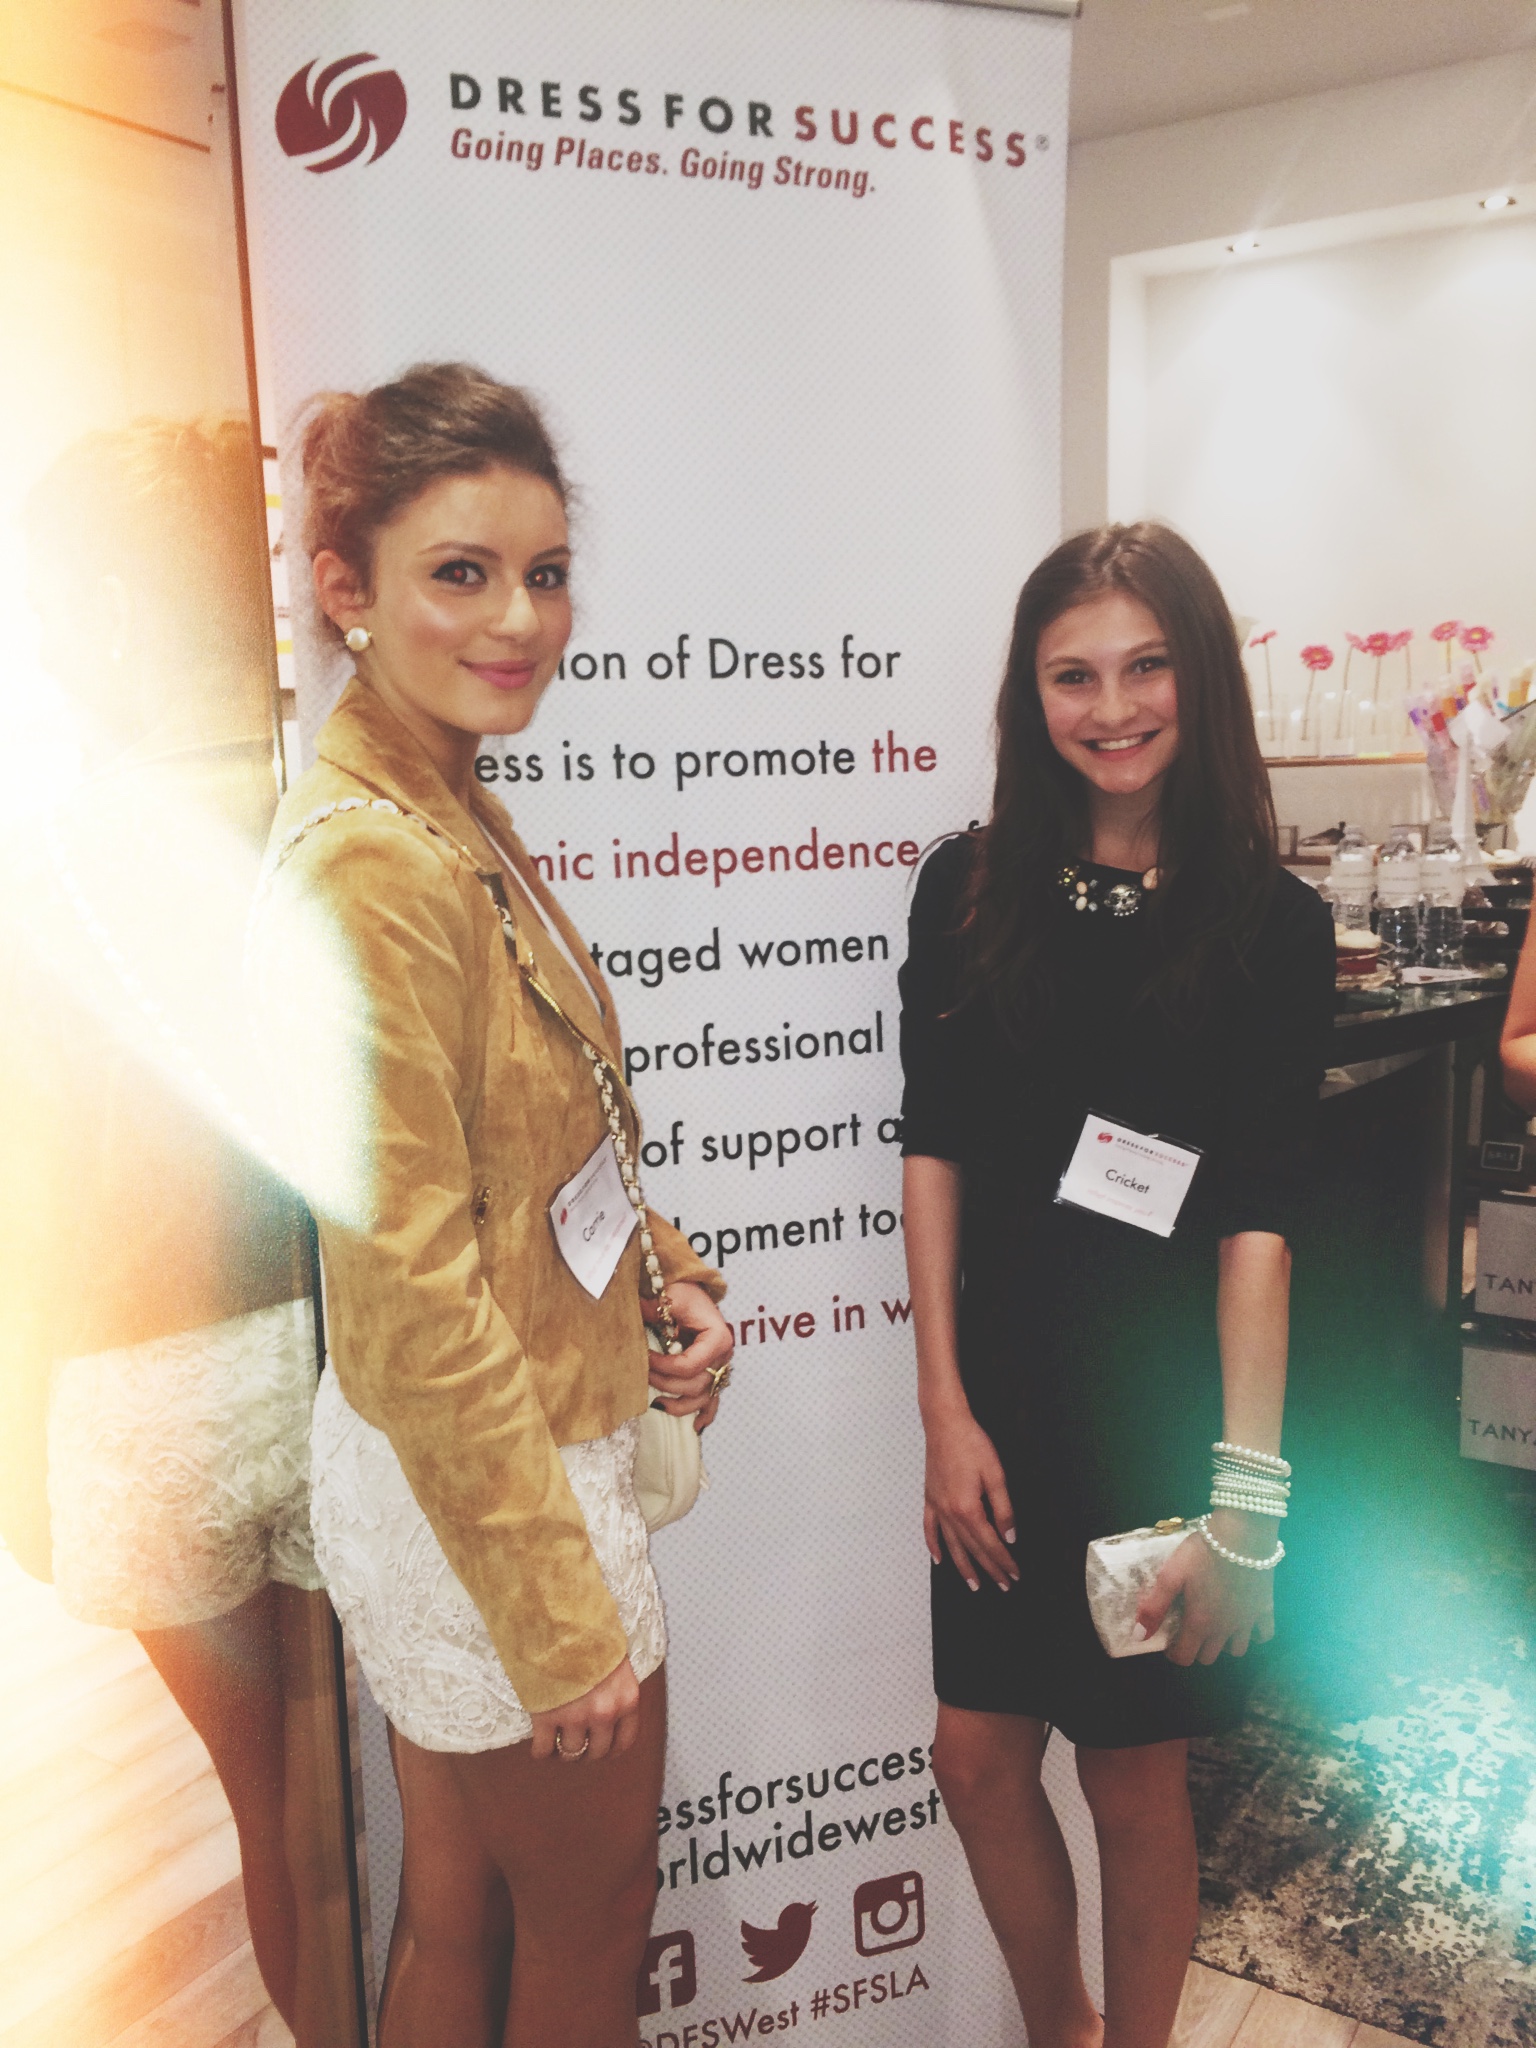 Carrie & Cricket Wampler at the Dress For Success Event